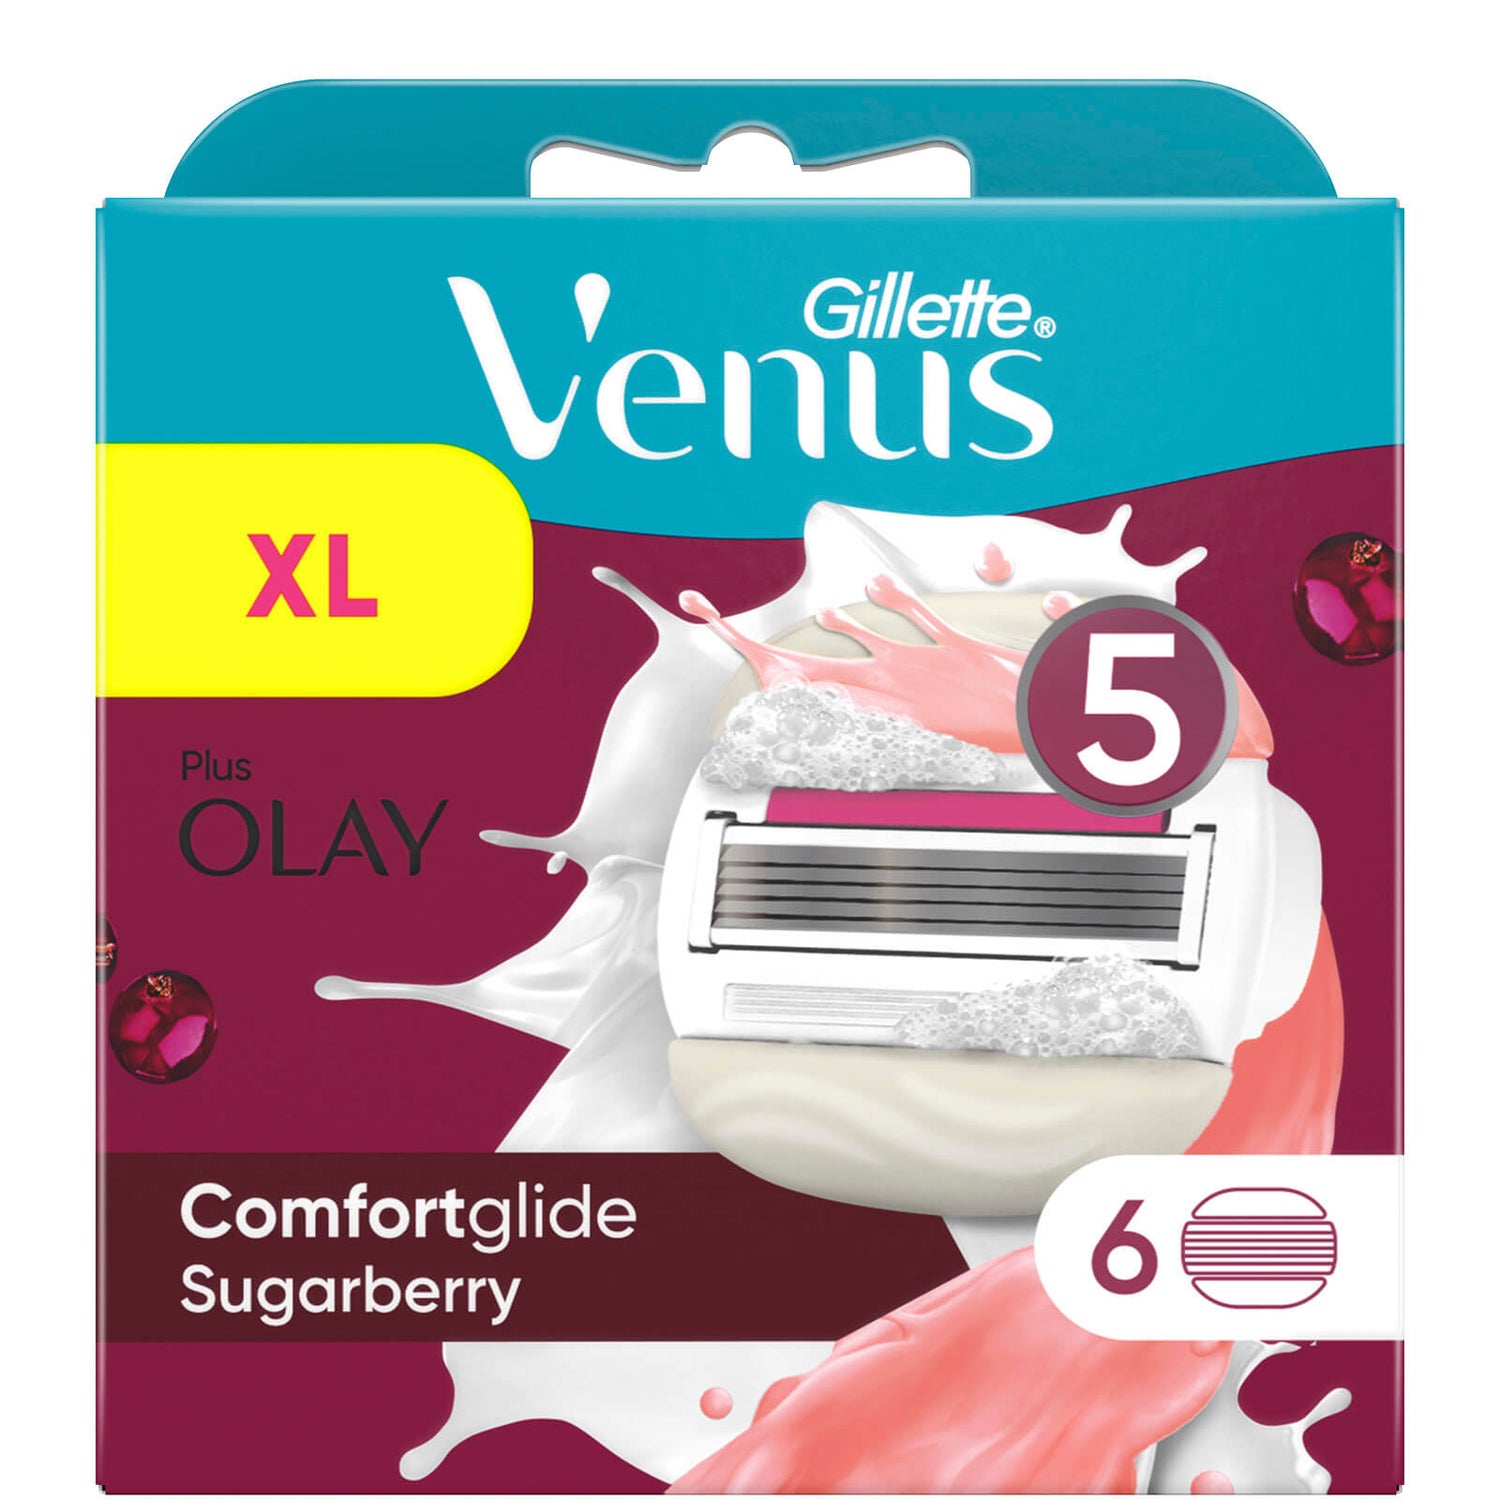 Venus Comfortglide with Olay Sugarberry Blades (6 Pack)